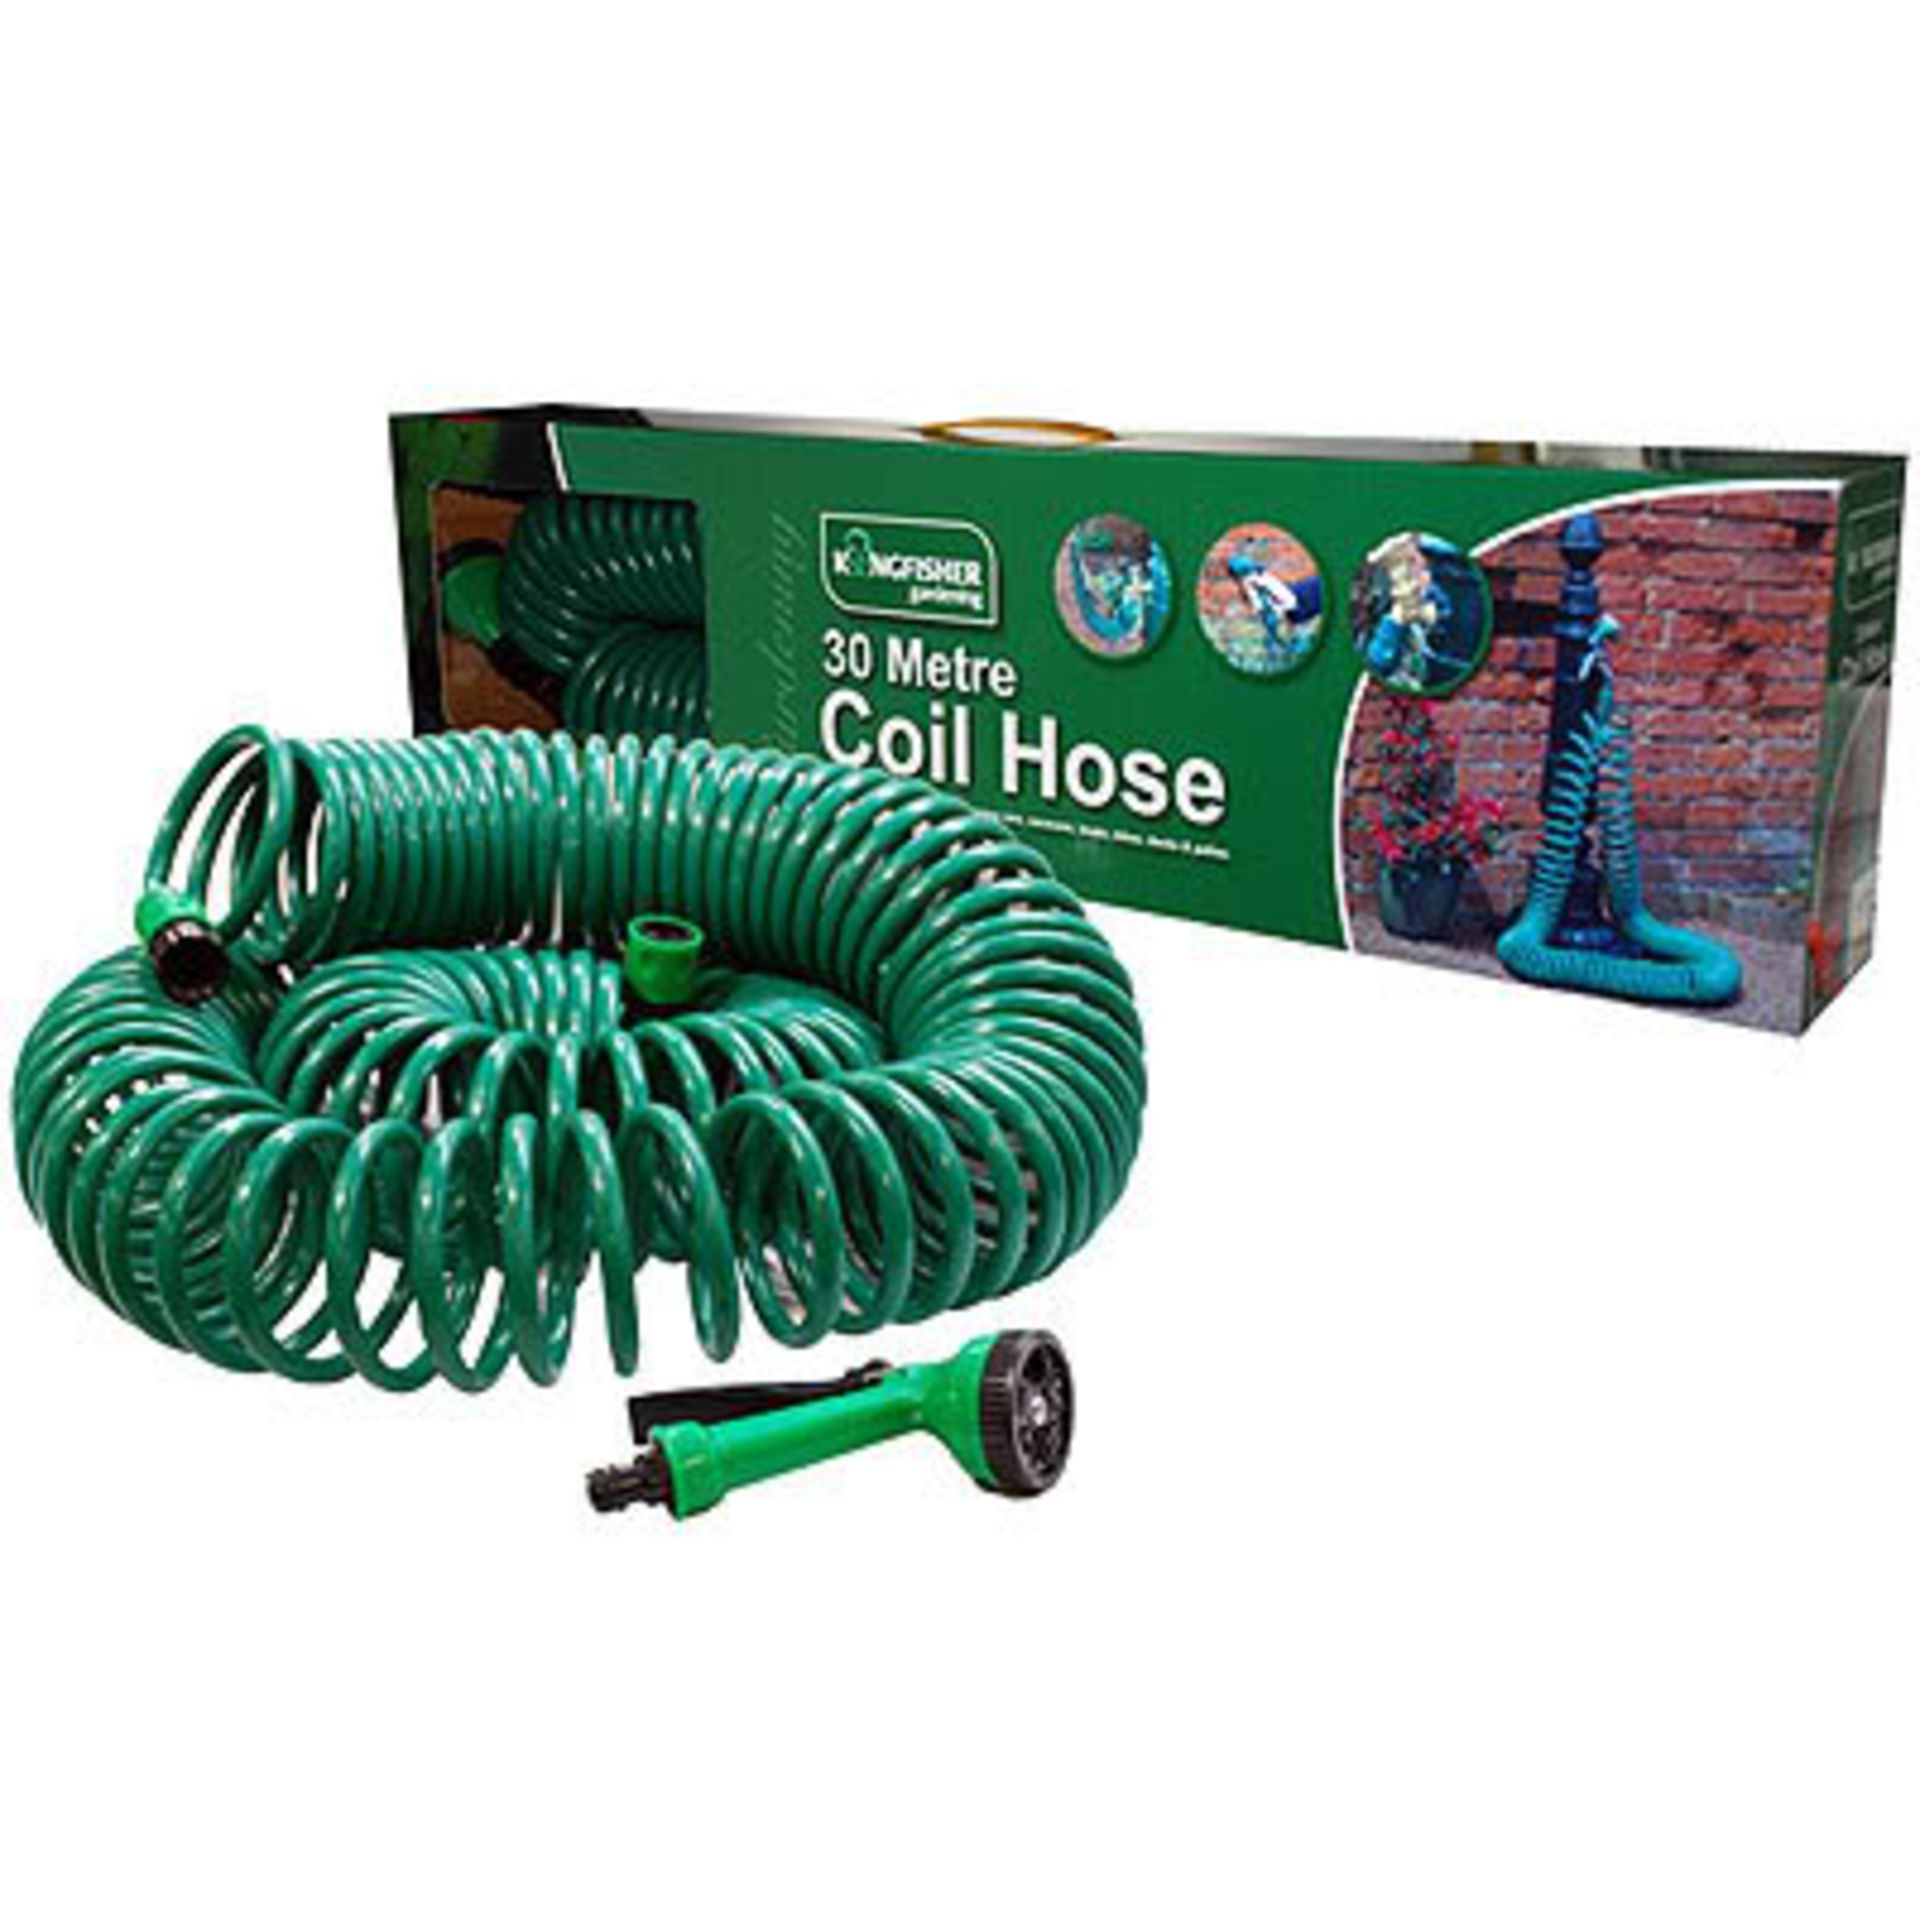 V  Grade A 30 Metre Coil Hose With Nozzle And Tap Connectors Etc